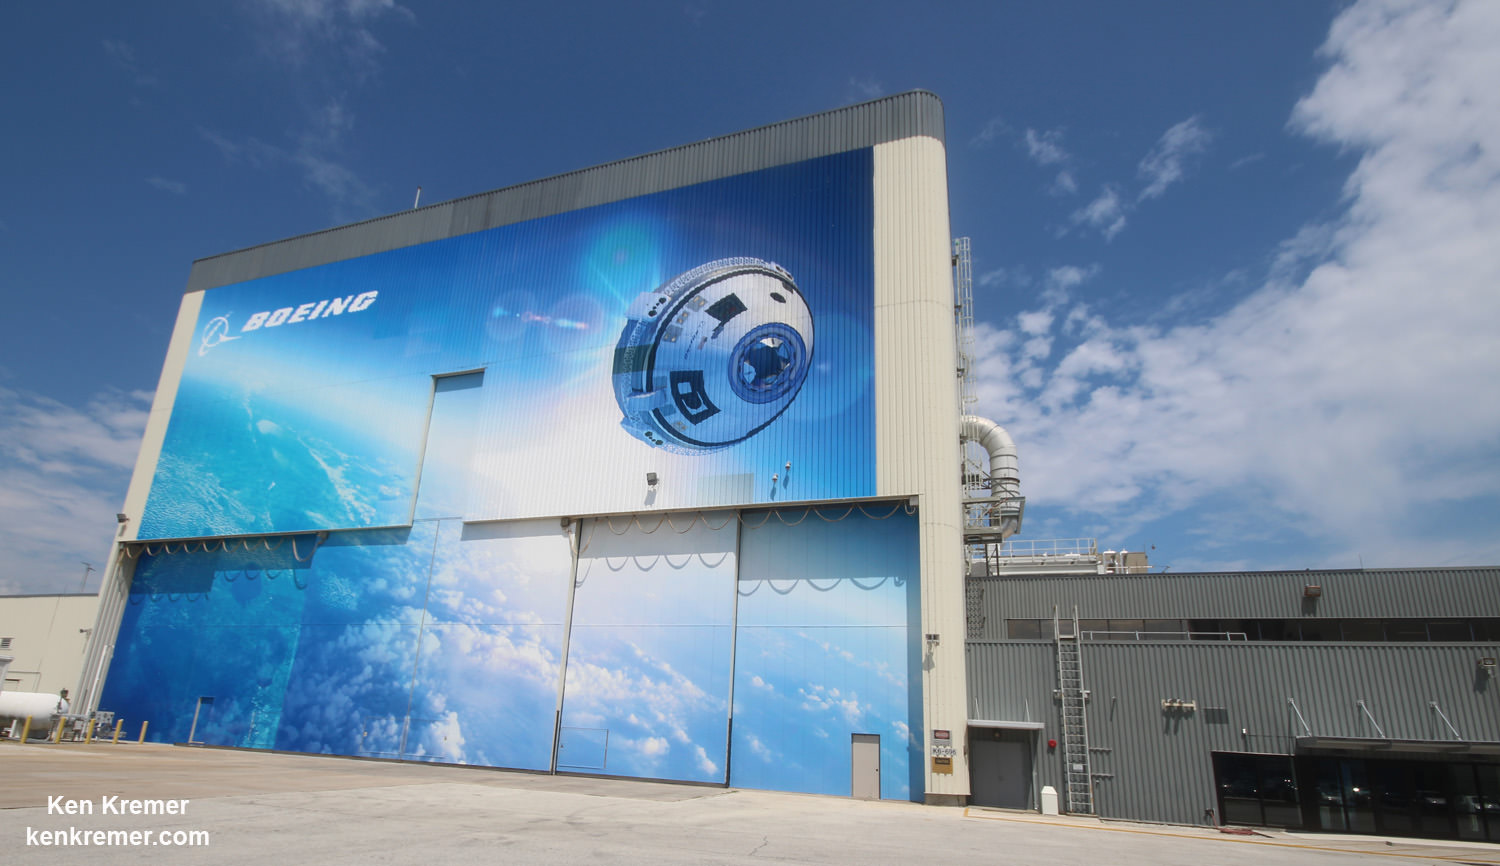 Boeing ‘Starliner’ commercial crew space taxi manufacturing facility marks Grand Opening at the Kennedy Space Center on Sept 4. 2015.   Exterior view depicting newly installed mural for the Boeing Company’s newly named CST-100 ‘Starliner’ commercial crew transportation spacecraft on the company’s Commercial Crew and Cargo Processing Facility (C3PF) at NASA’s Kennedy Space Center in Florida.  Credit: Ken Kremer /kenkremer.com